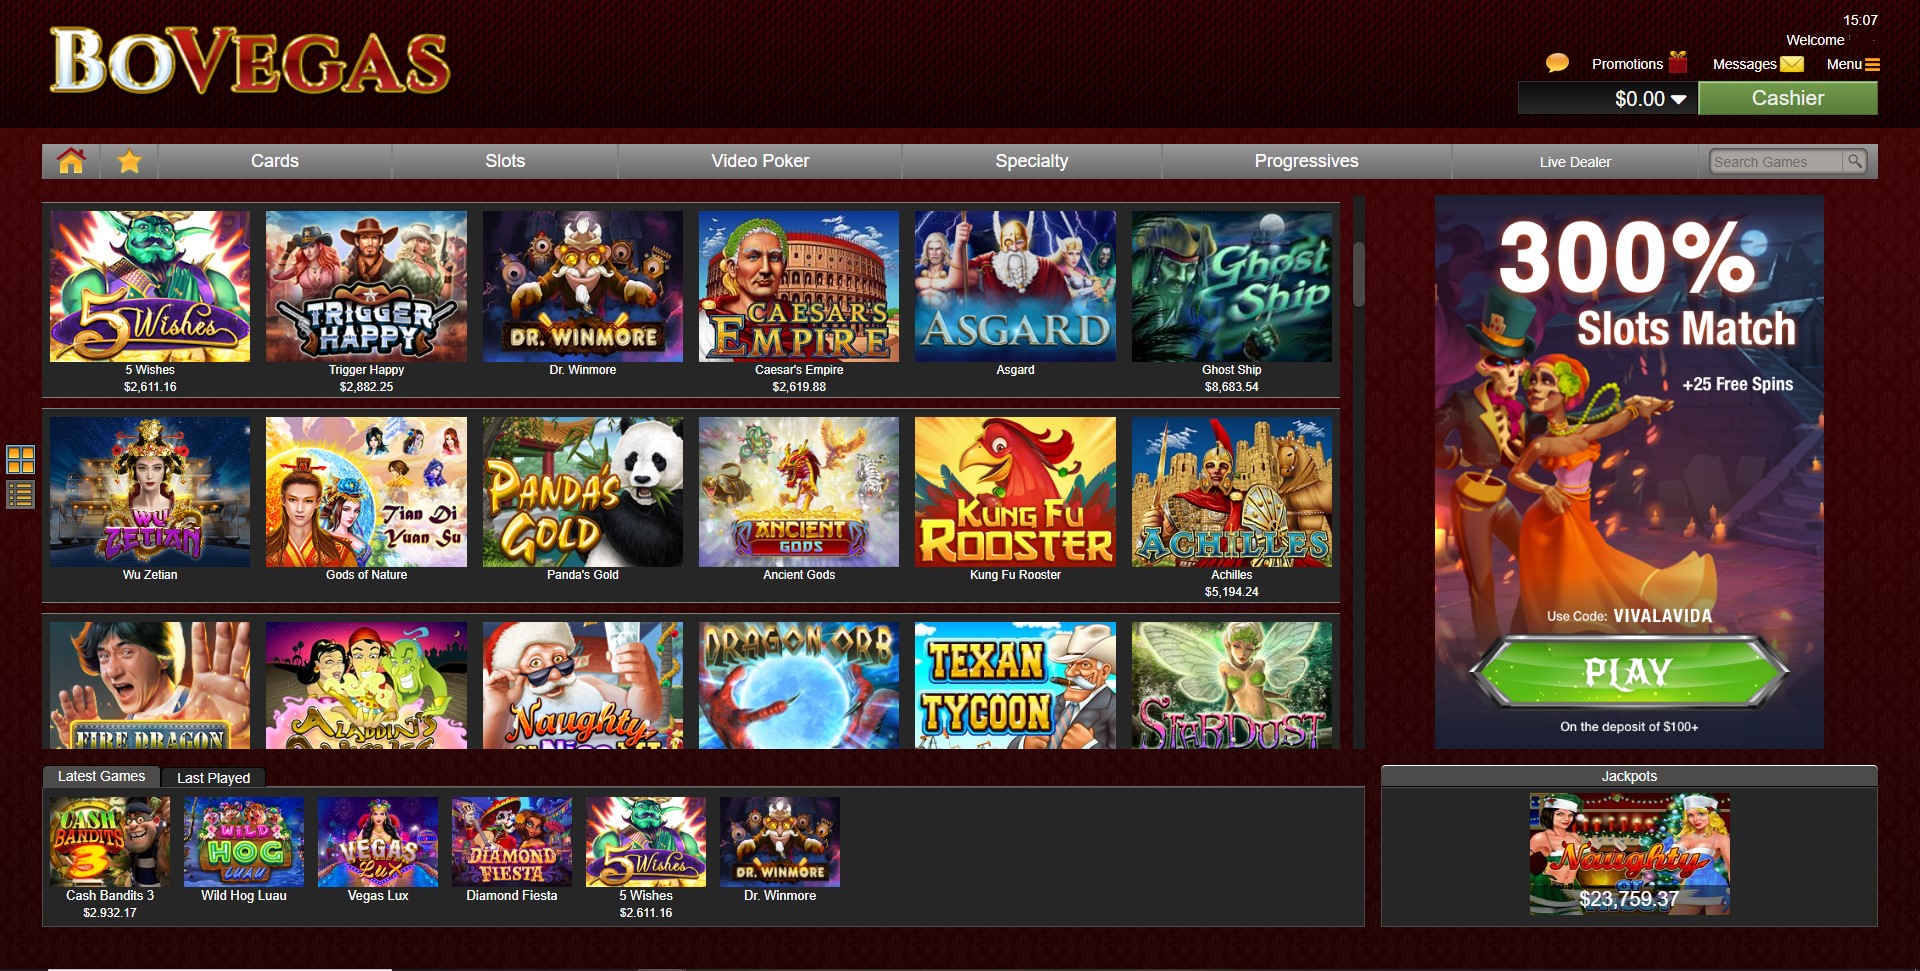 Selection of online slots at BoVegas Casino